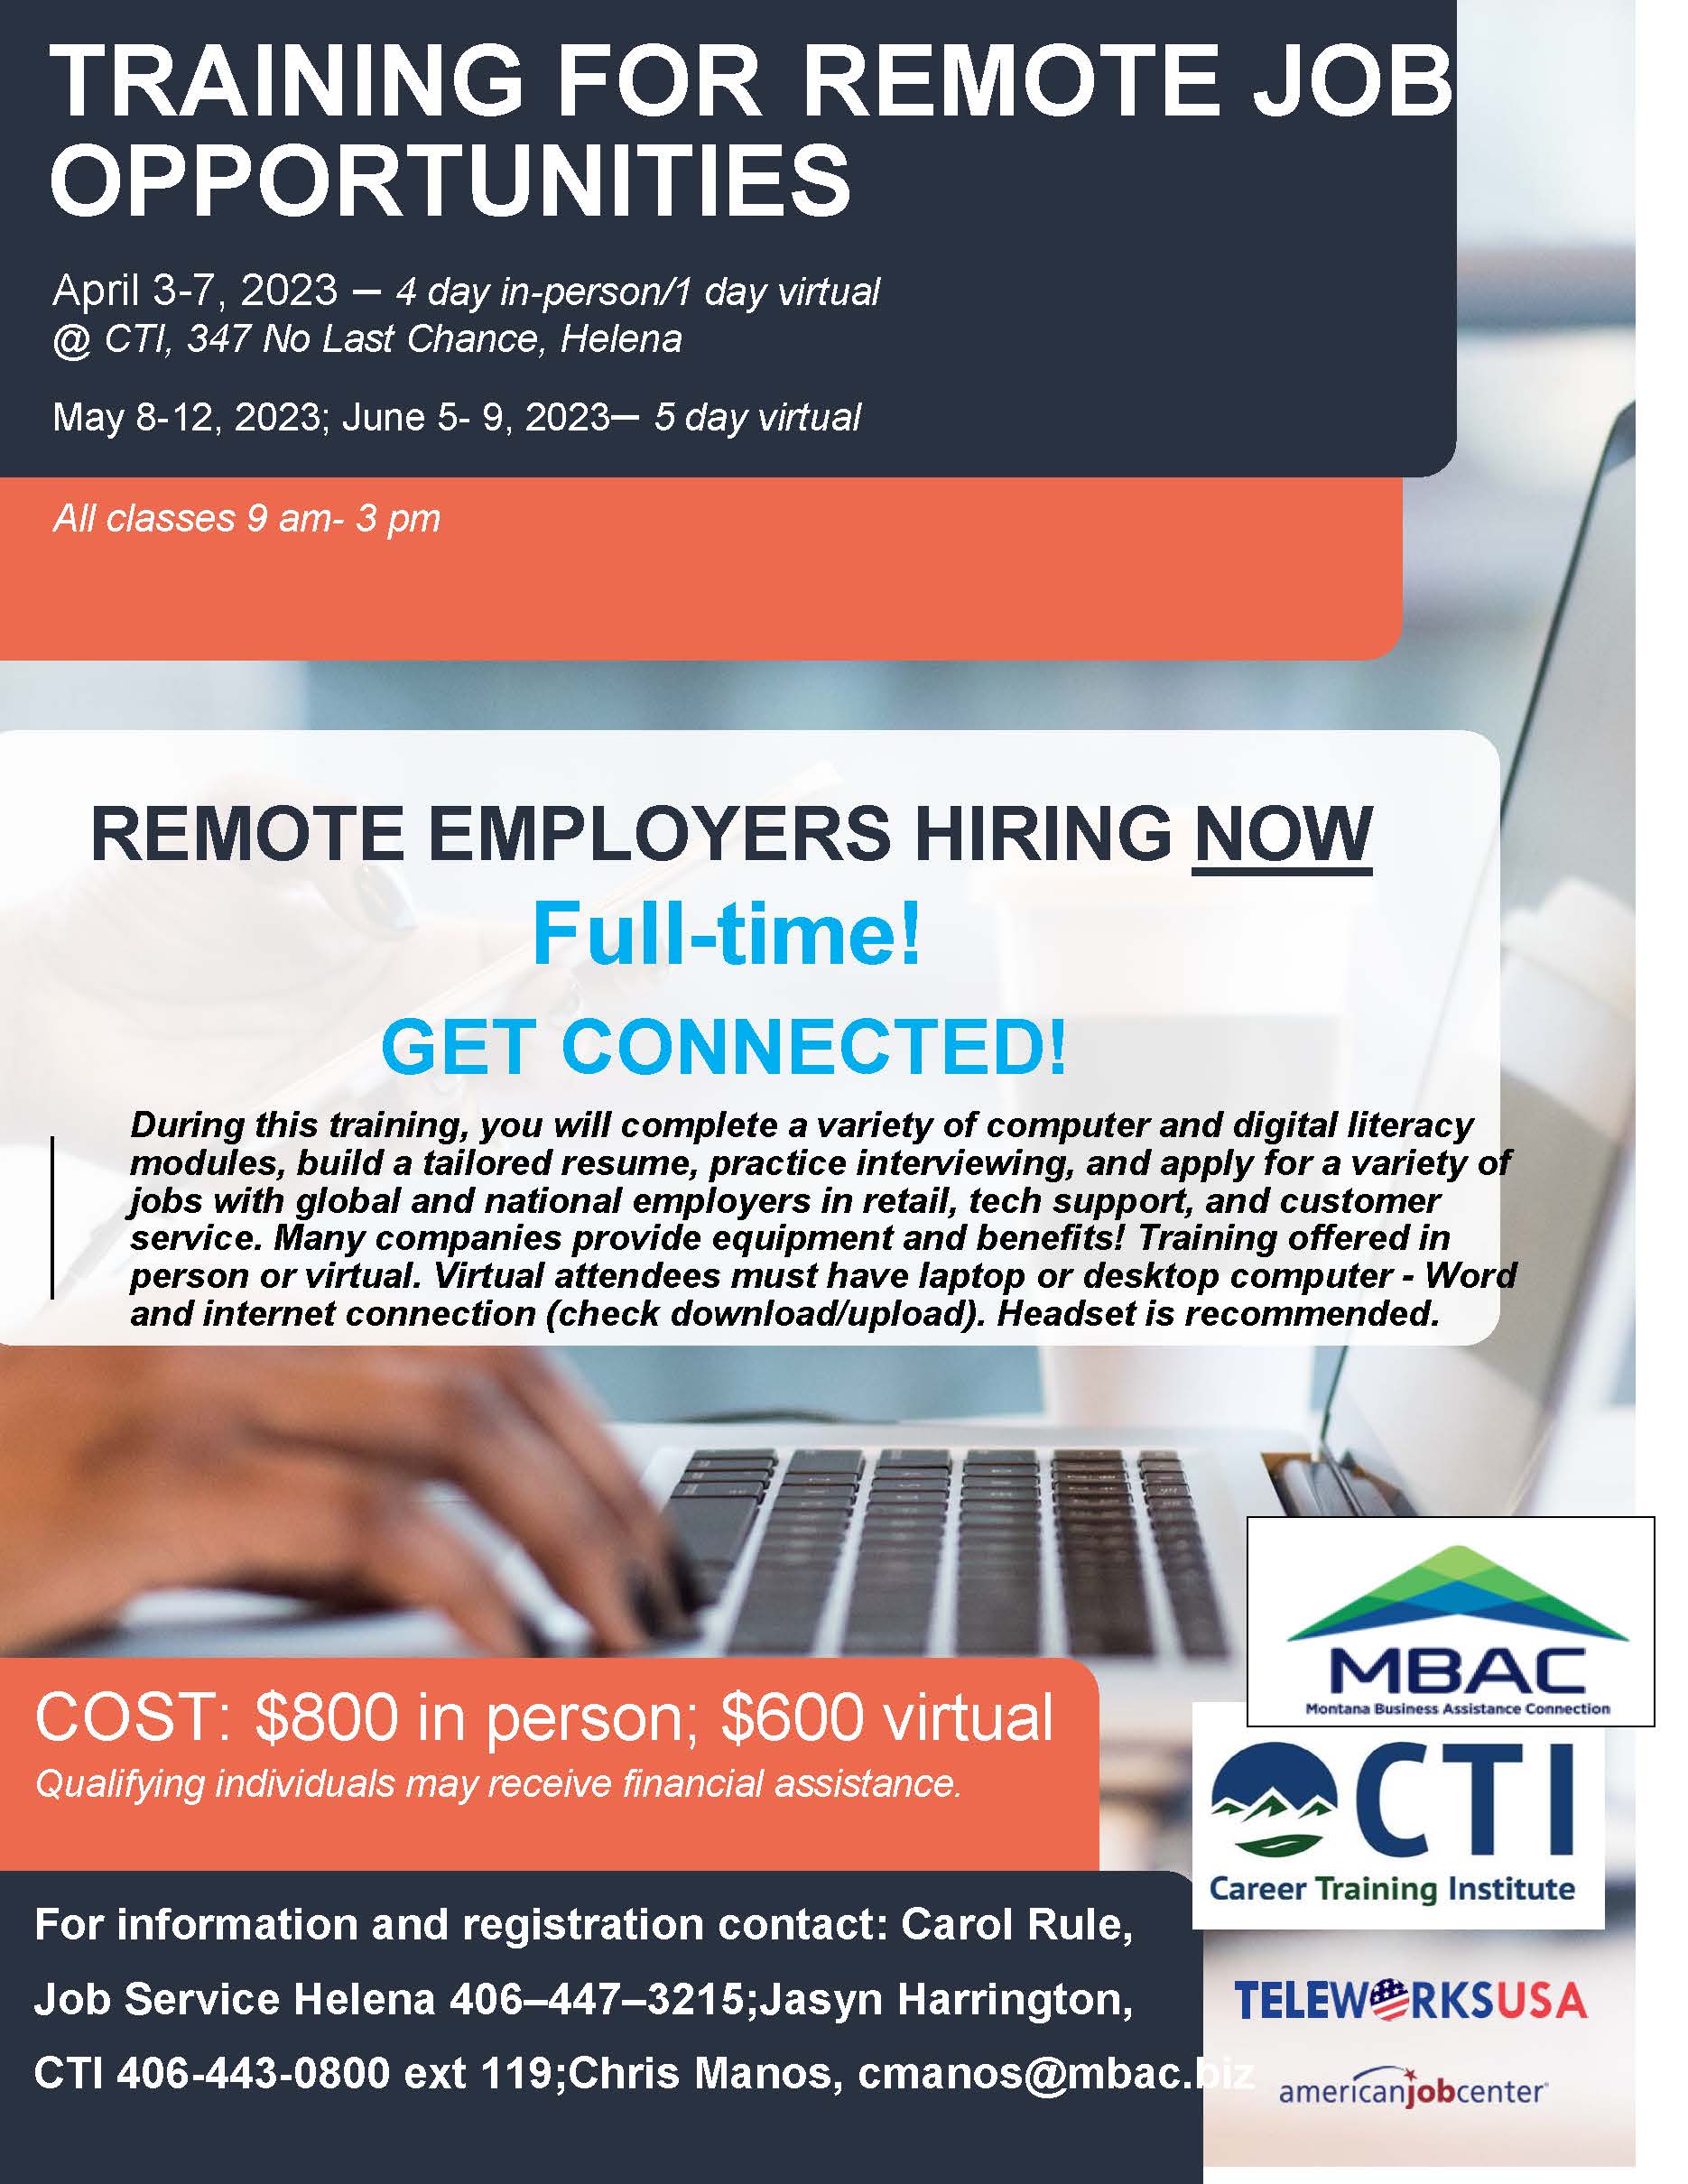 Training for Remote Job Opportunities flyer